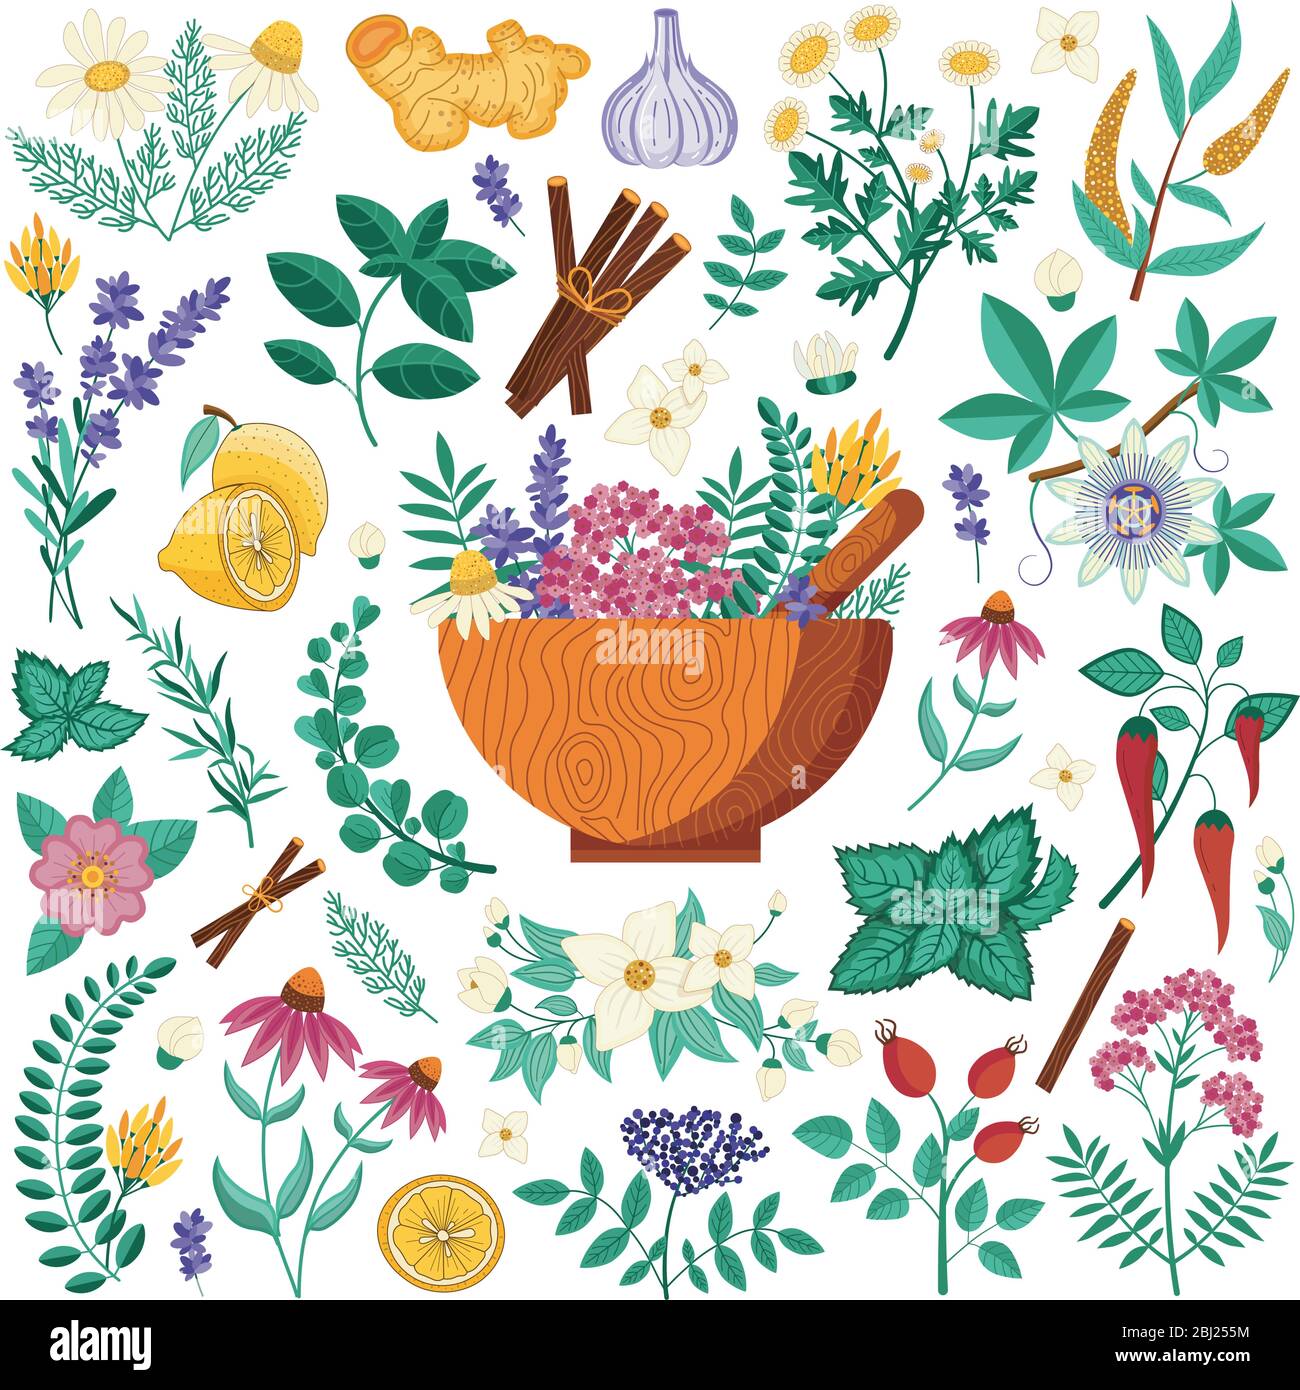 Medical Herbs and Homeopathic Heeling Plants Set Stock Vector